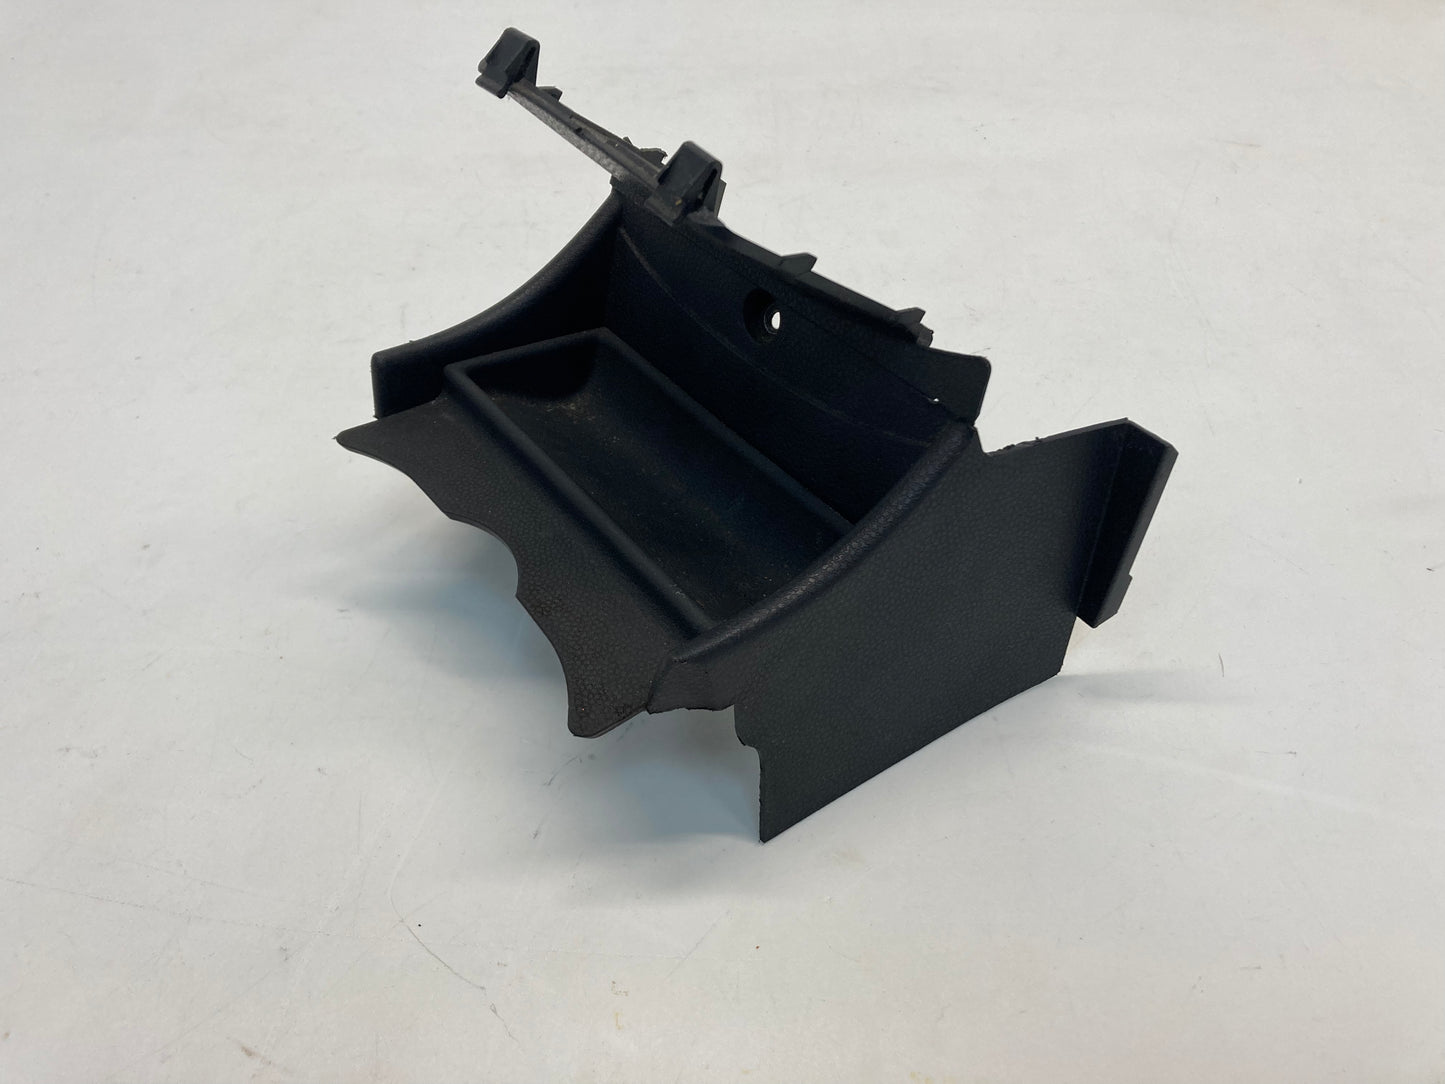 Mini Cooper Center Console Utility Box and Tray without AUX Input 51167121738 05-08 R50 R52 R53